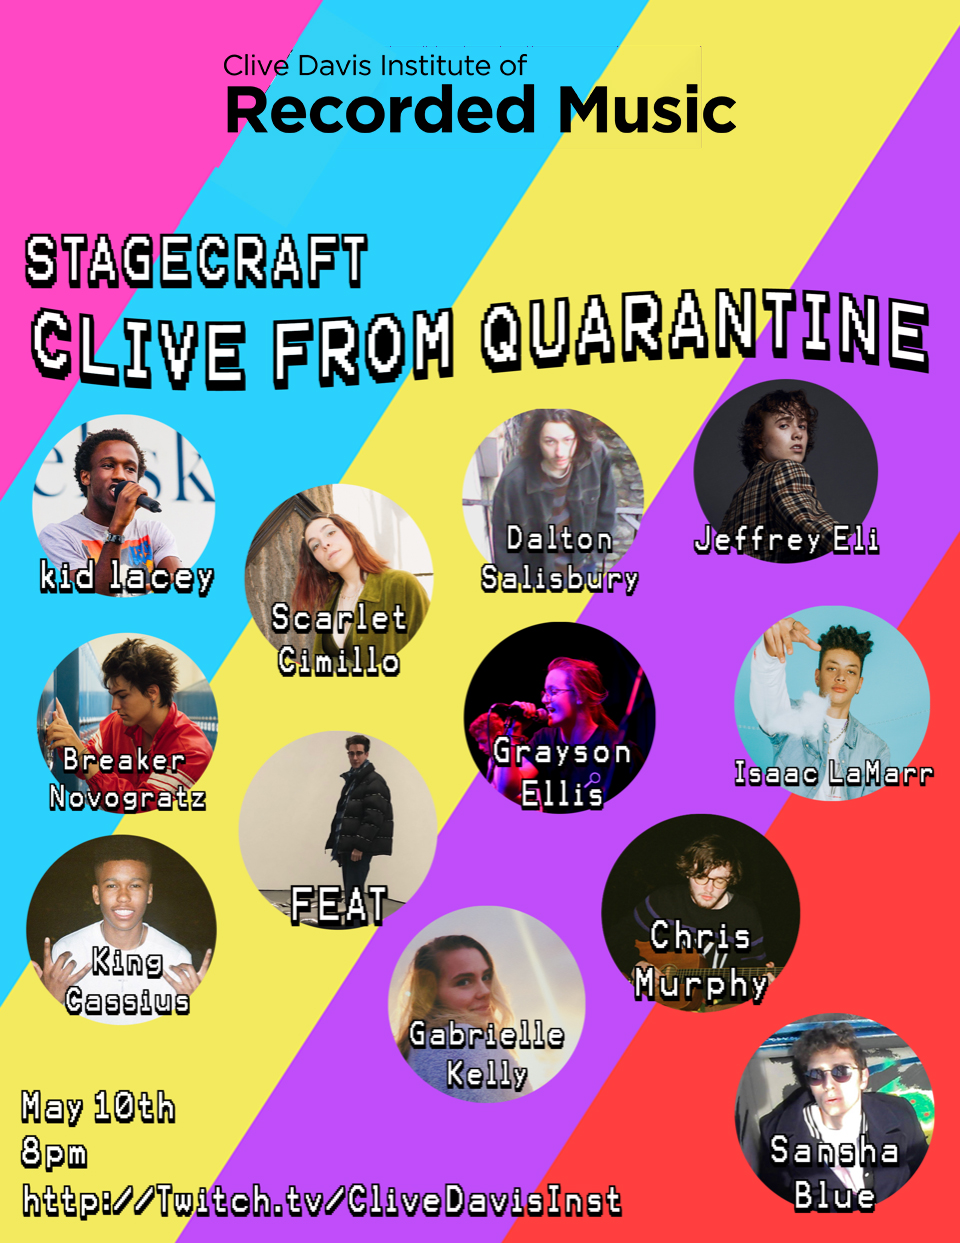 Flyer for "Stagecraft: Clive from Quarantine" Performance Showcase on Twitch.TV/CliveDavisInst on May 10th  at 8pm ET